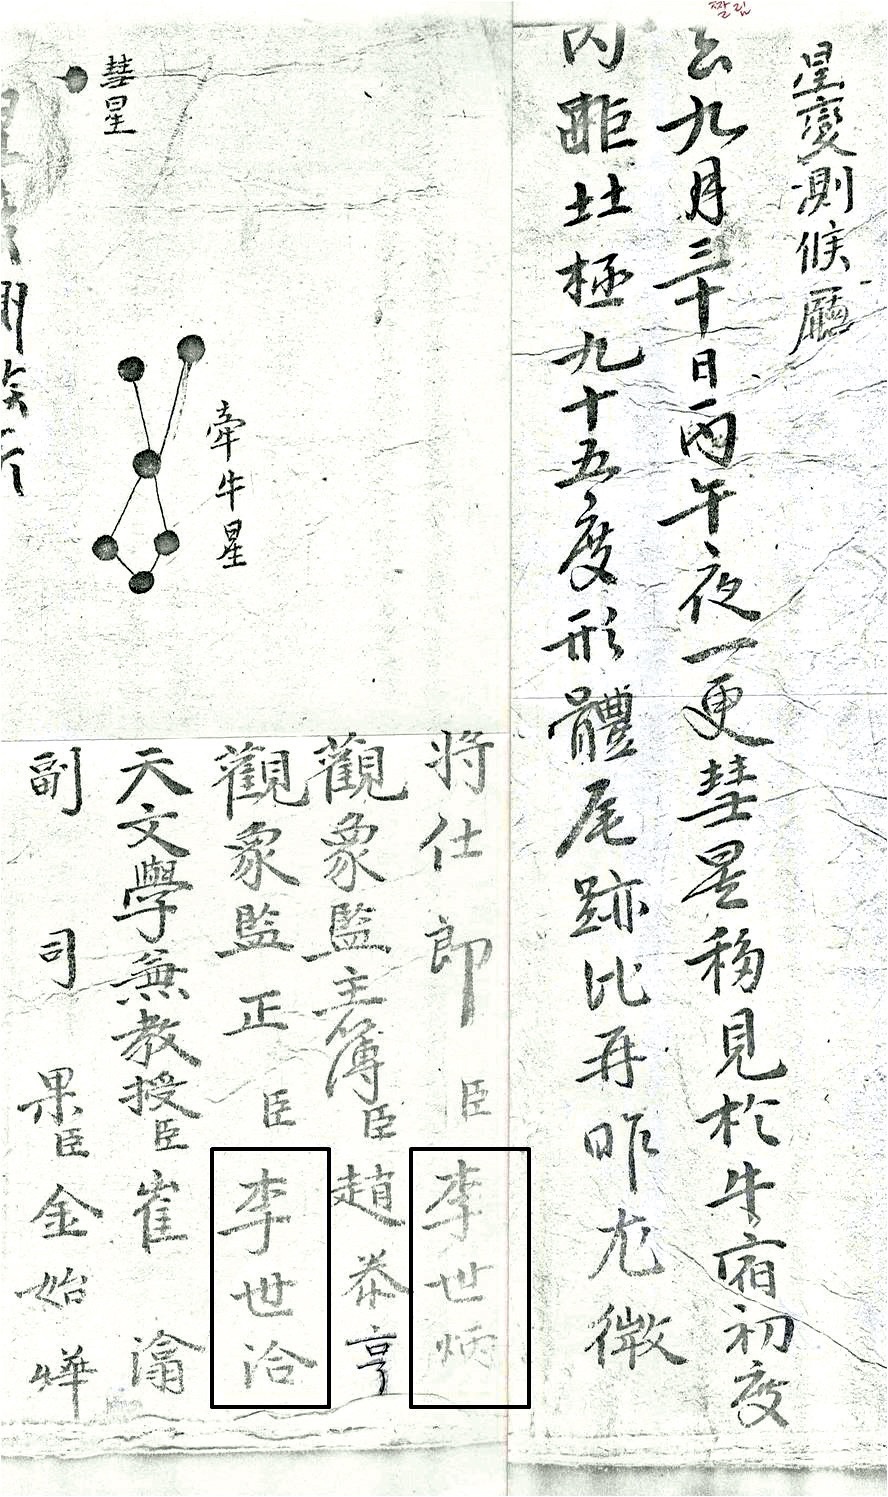 A comet record on the thirtieth day of the ninth month of the 1723 SeongbyeonDeungrok. Two names, Yi Se-byeong (李世炳) and Yi Se- heup (李世洽), are seen in the first and the third from right among five observers (Courtesy of Yonsei University Library).